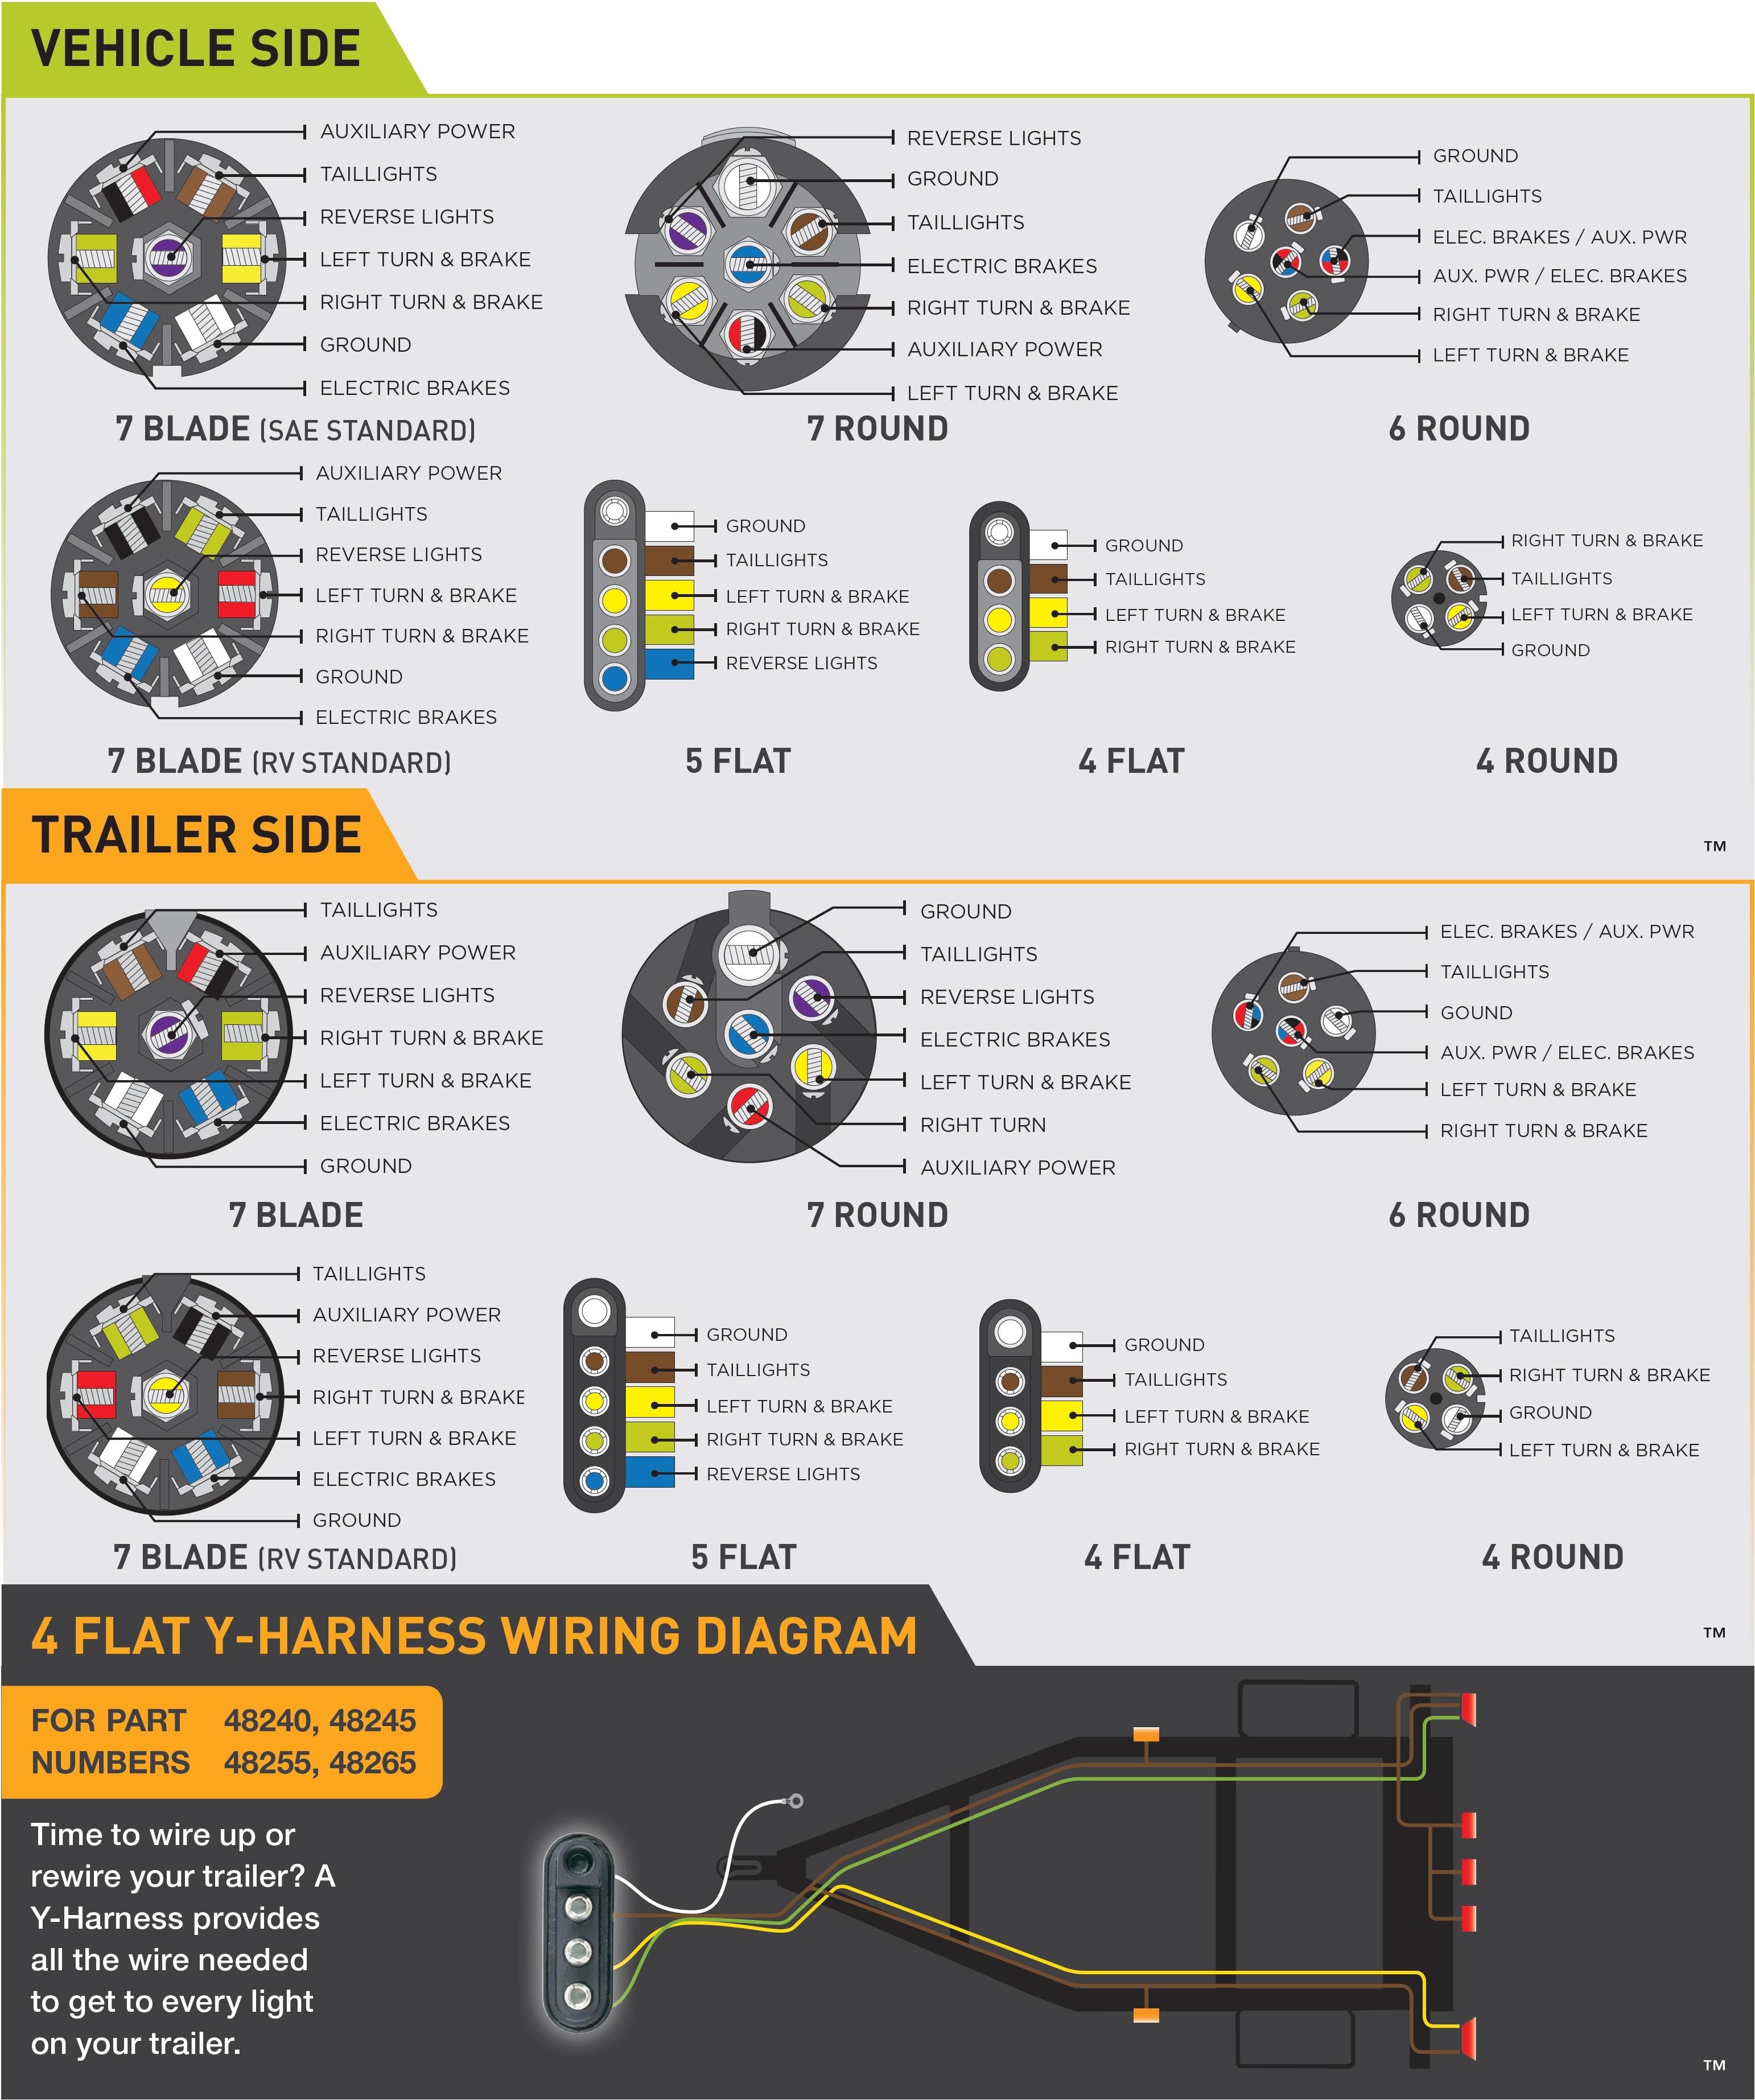 7 Wire Trailer Diagram Chevrolet - Trusted Wiring Diagram Online - 6 Wire Trailer Wiring Diagram